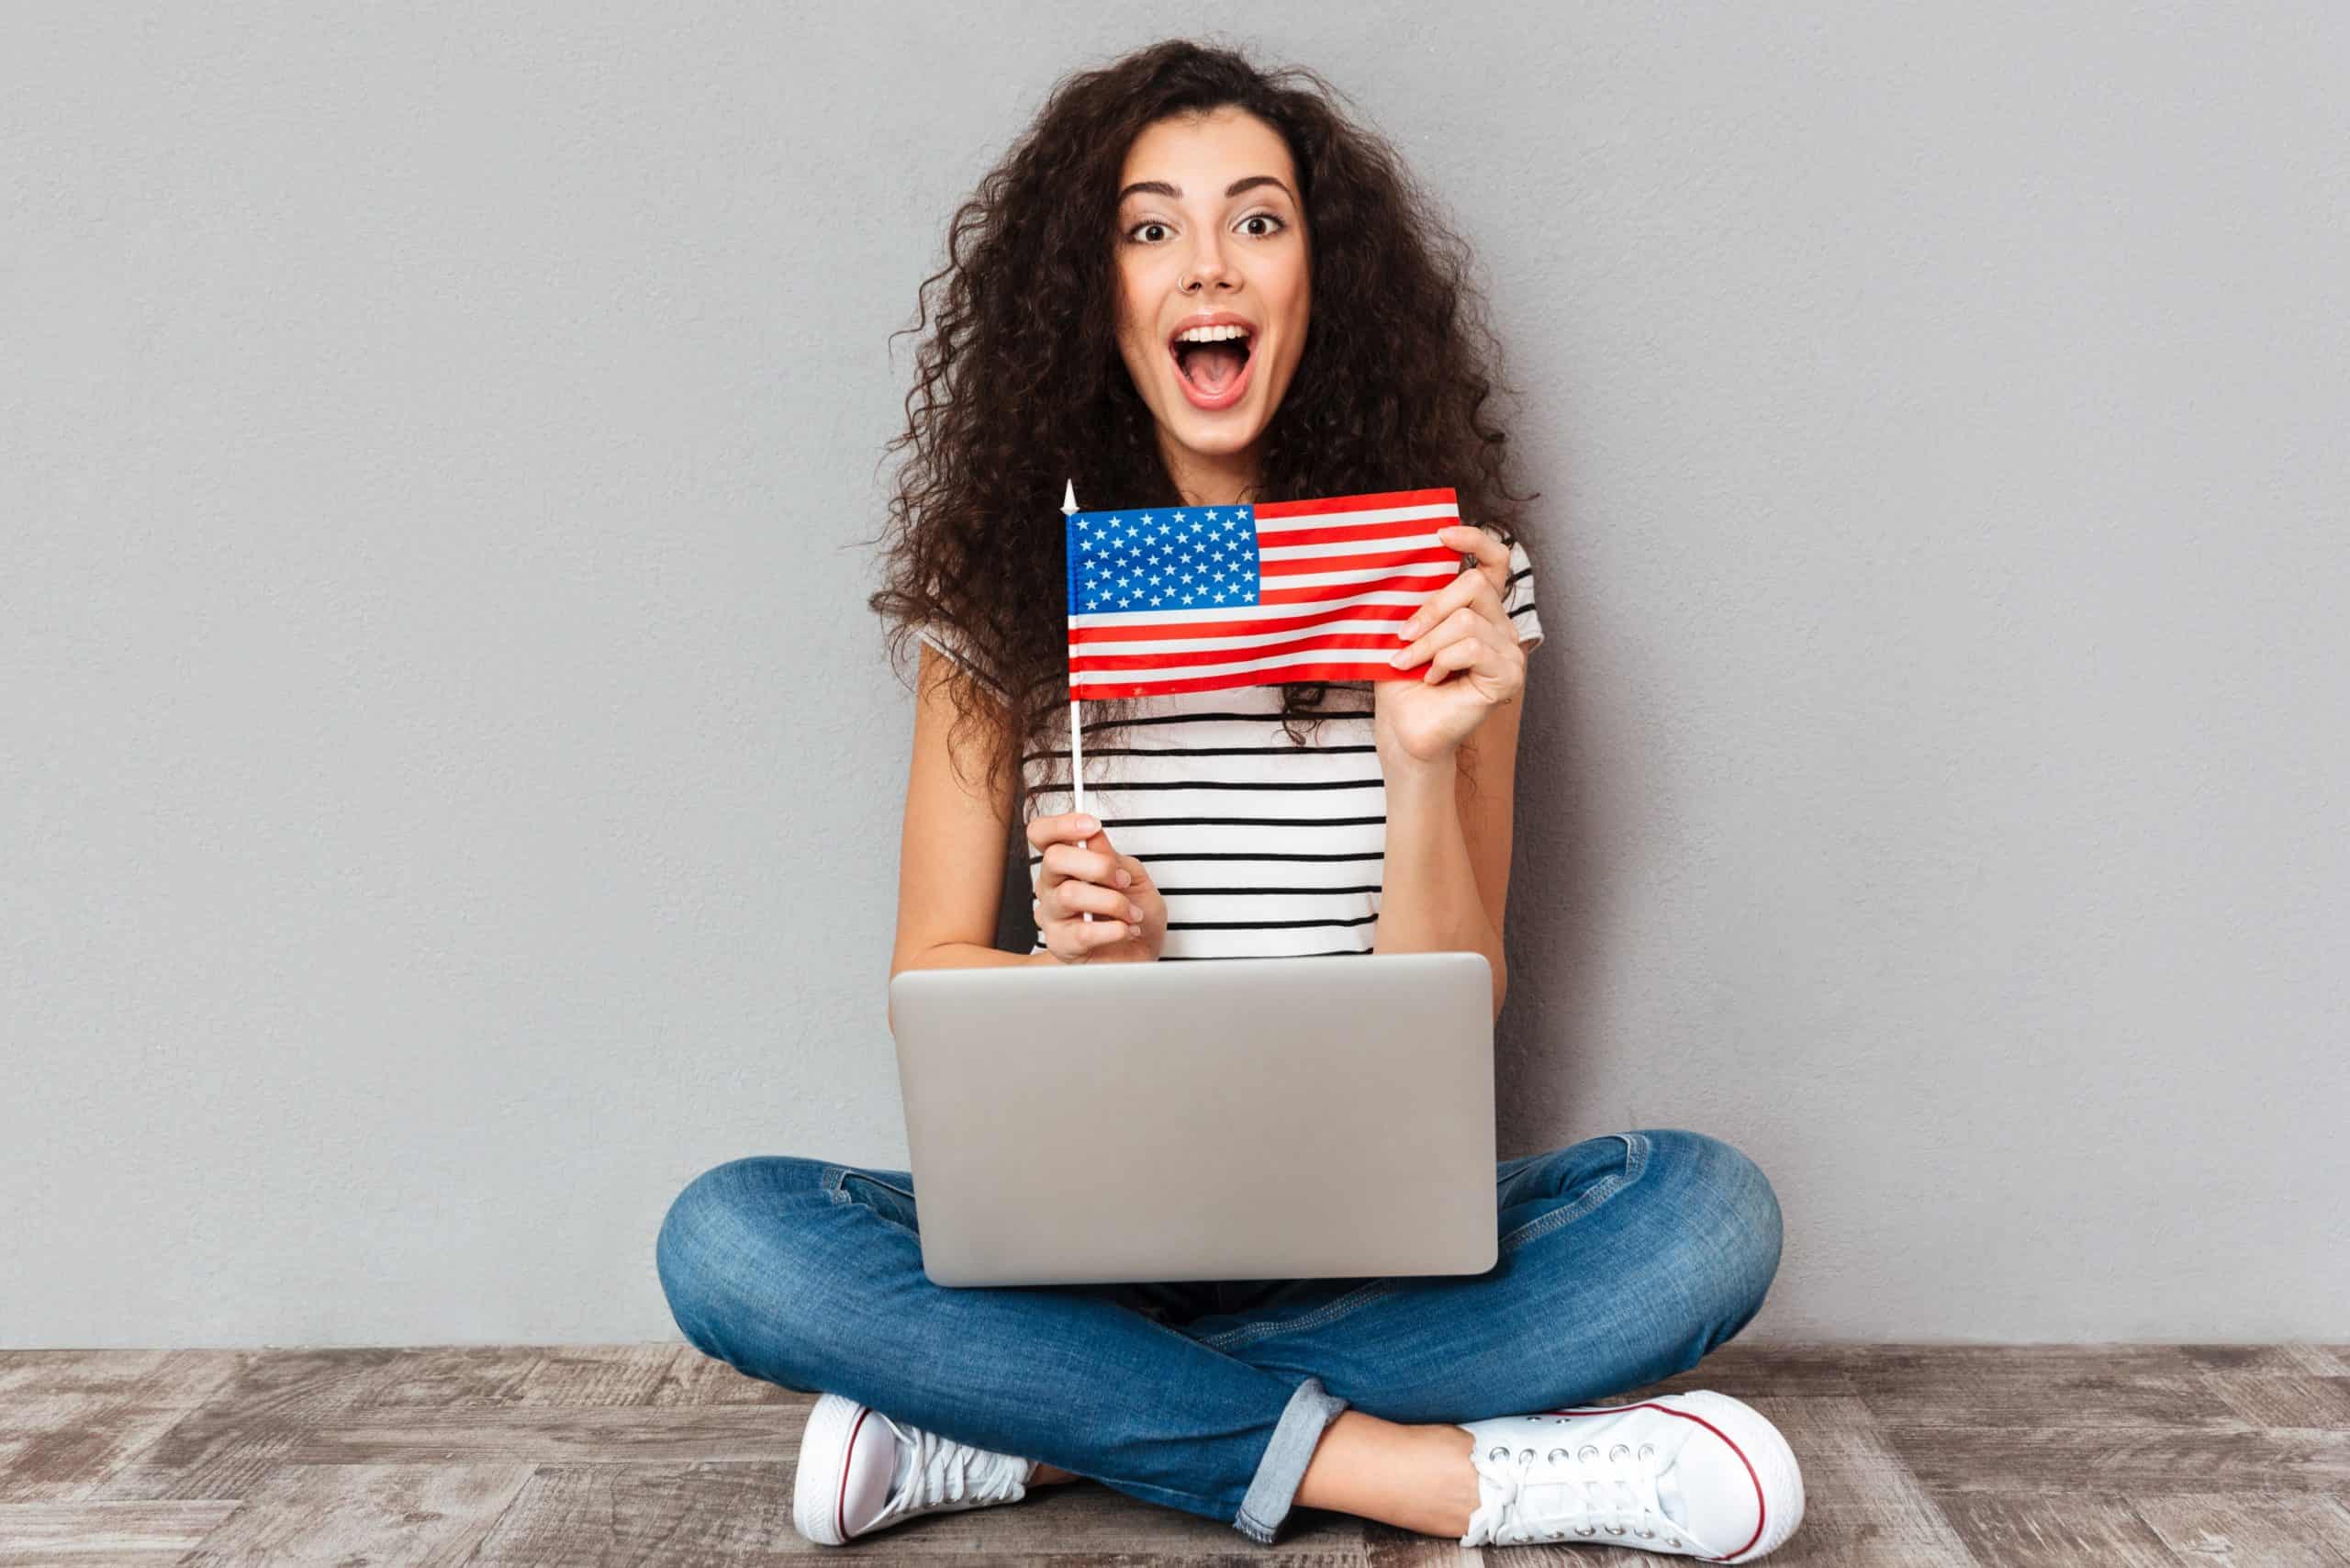 Gorgeous female with beautiful smile sitting in lotus pose with silver computer on legs, demonstrating american flag on camera over grey wall